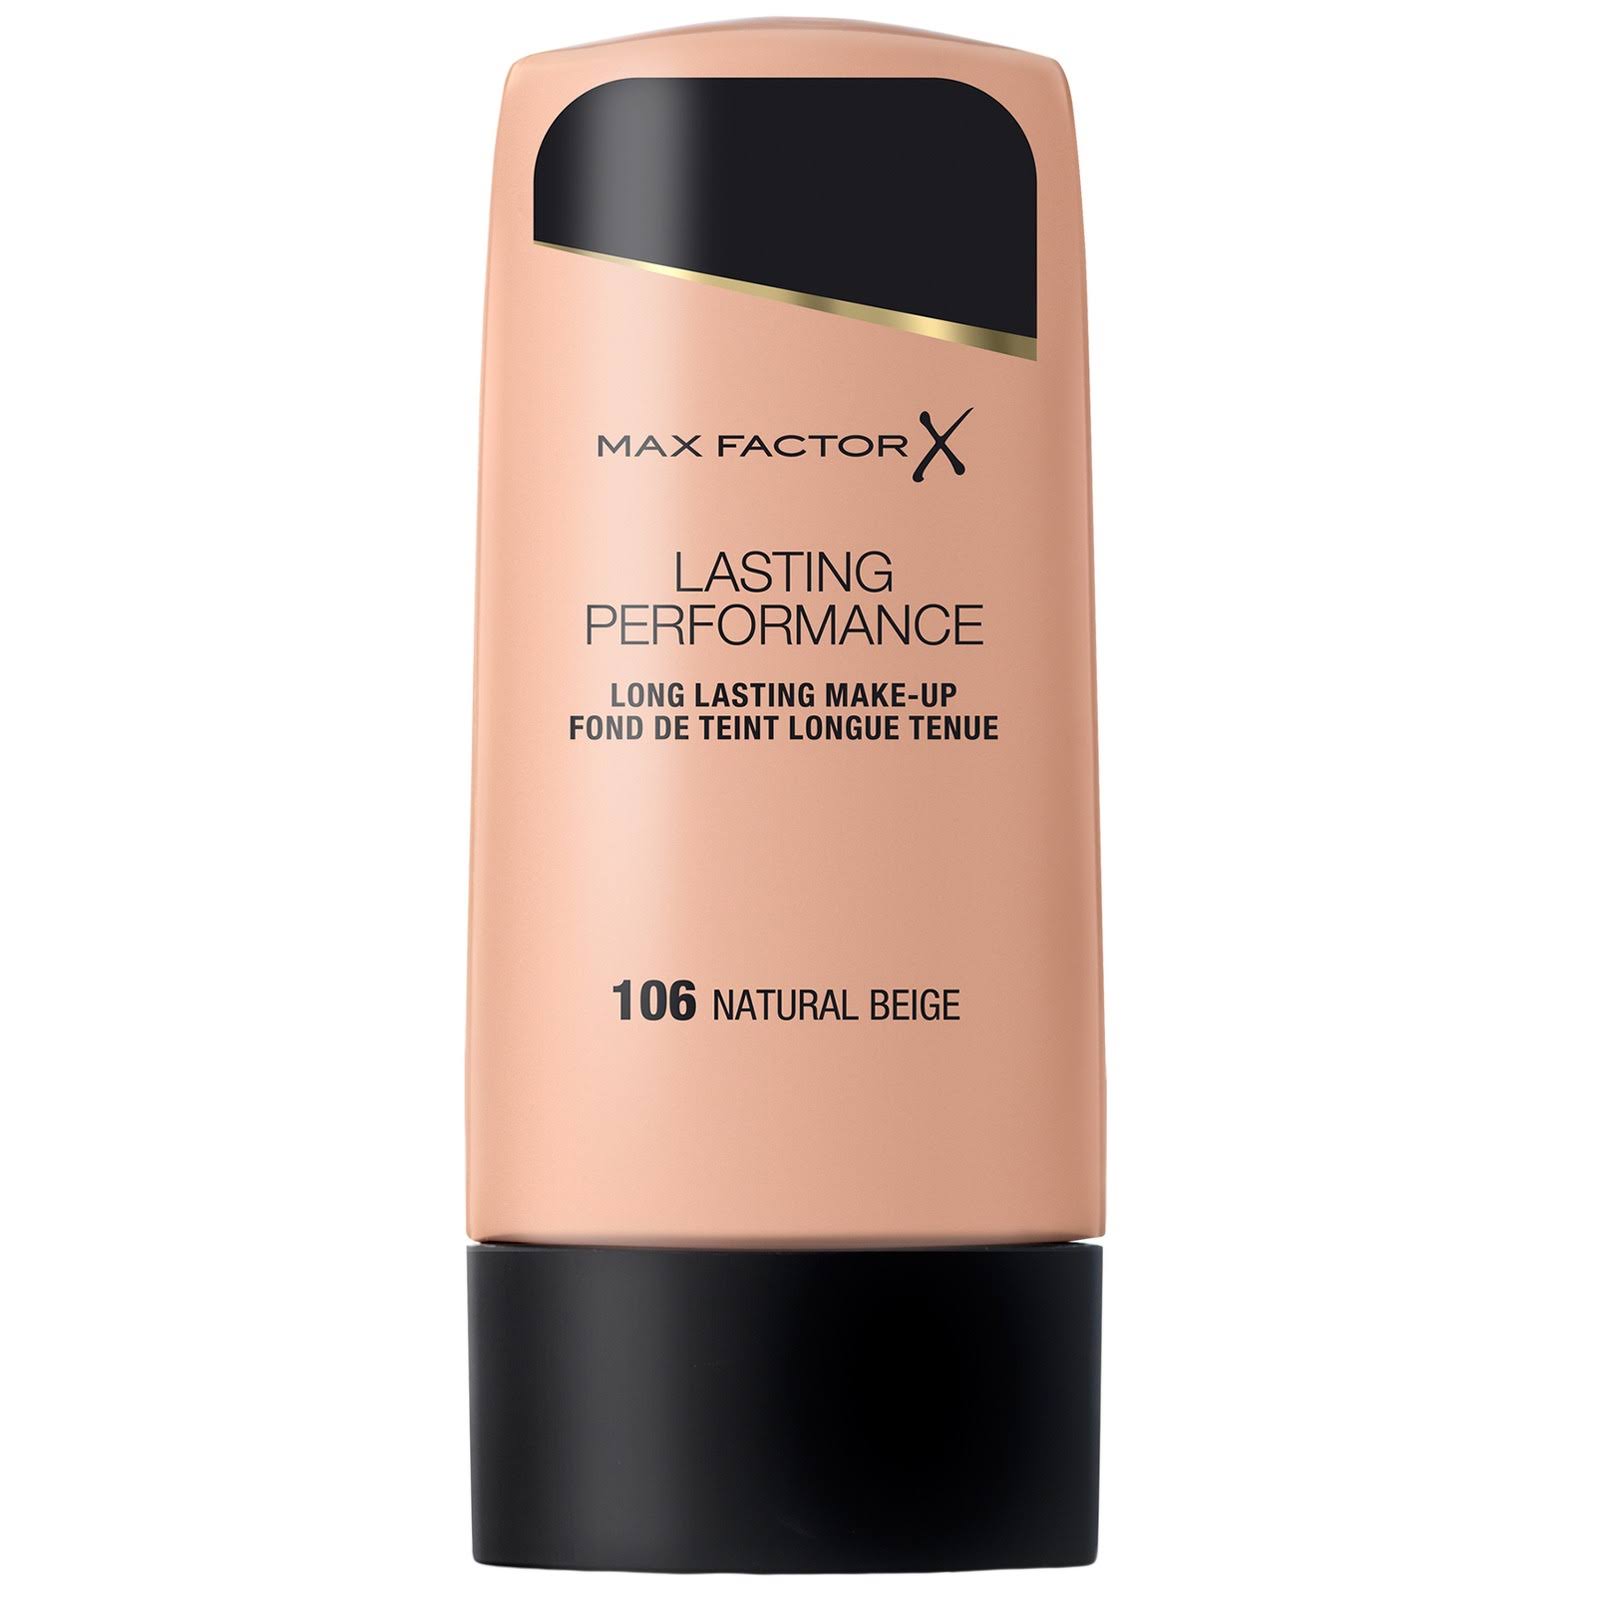 Max Factor Lasting Performance Foundation - 106 Natural Beige, 35ml